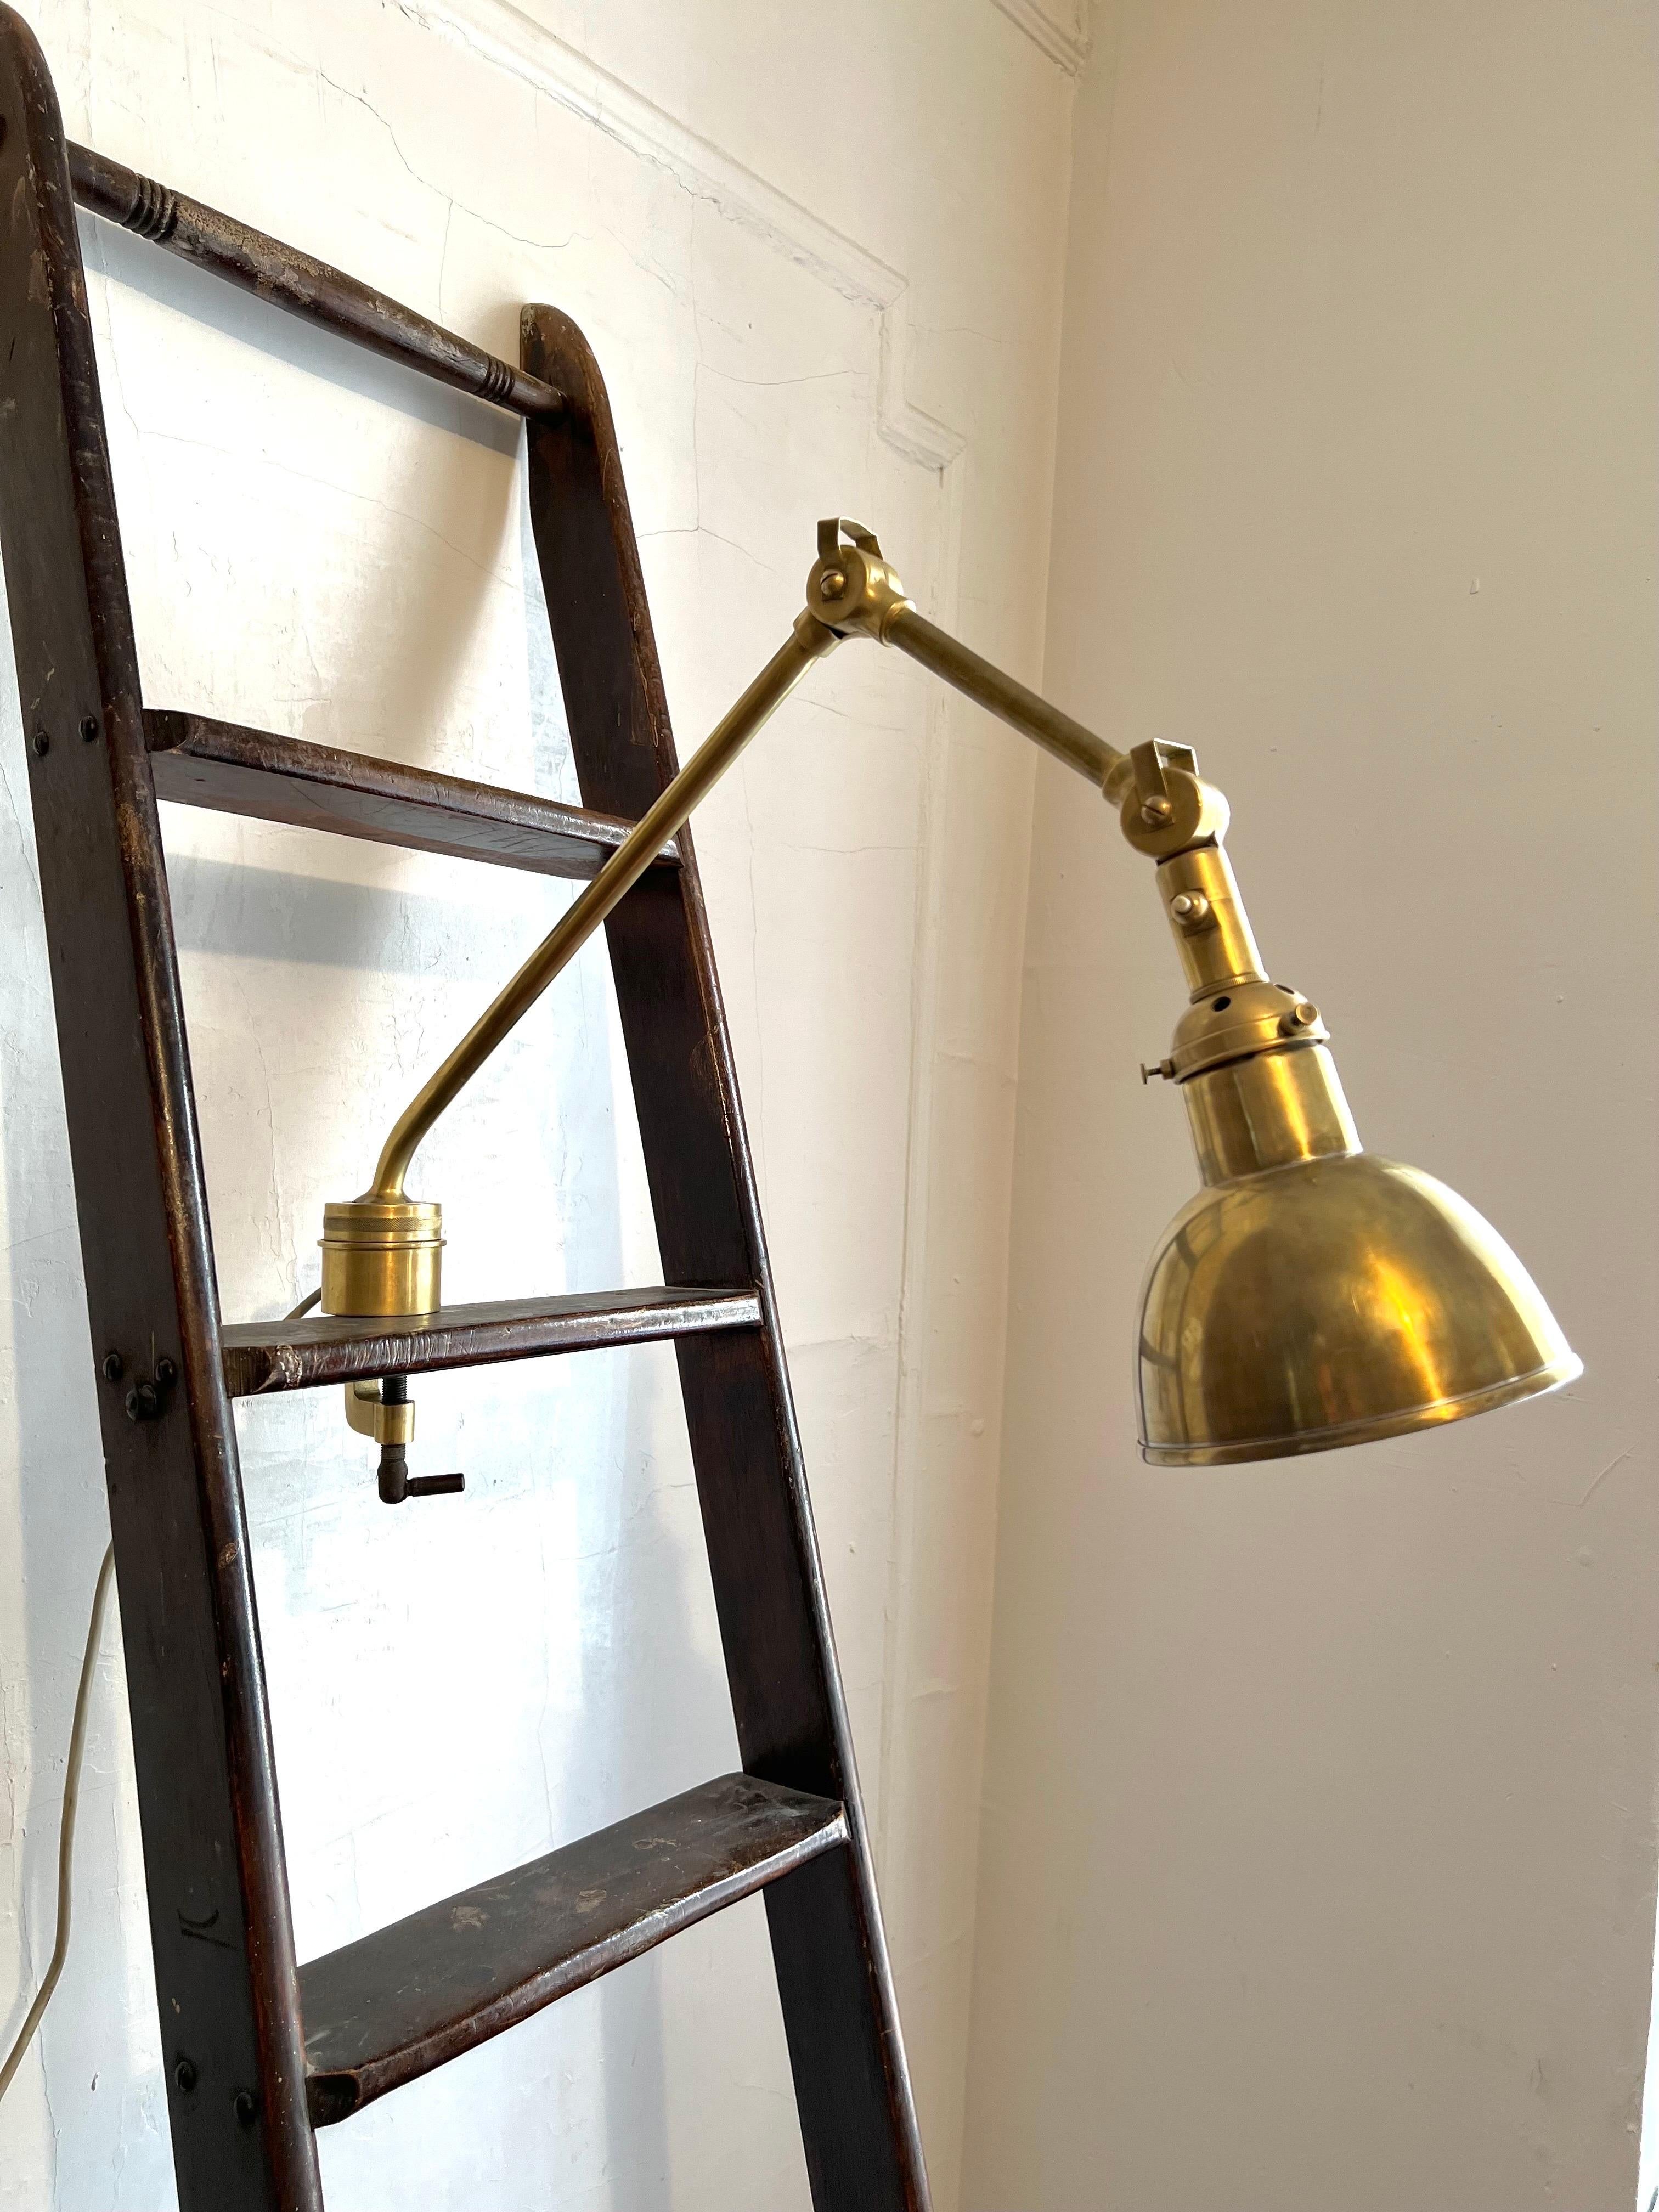 Swedish Midcentury Marine Brass Clamp Lamp and Floor Lamp Sculpture In Good Condition For Sale In New York, NY